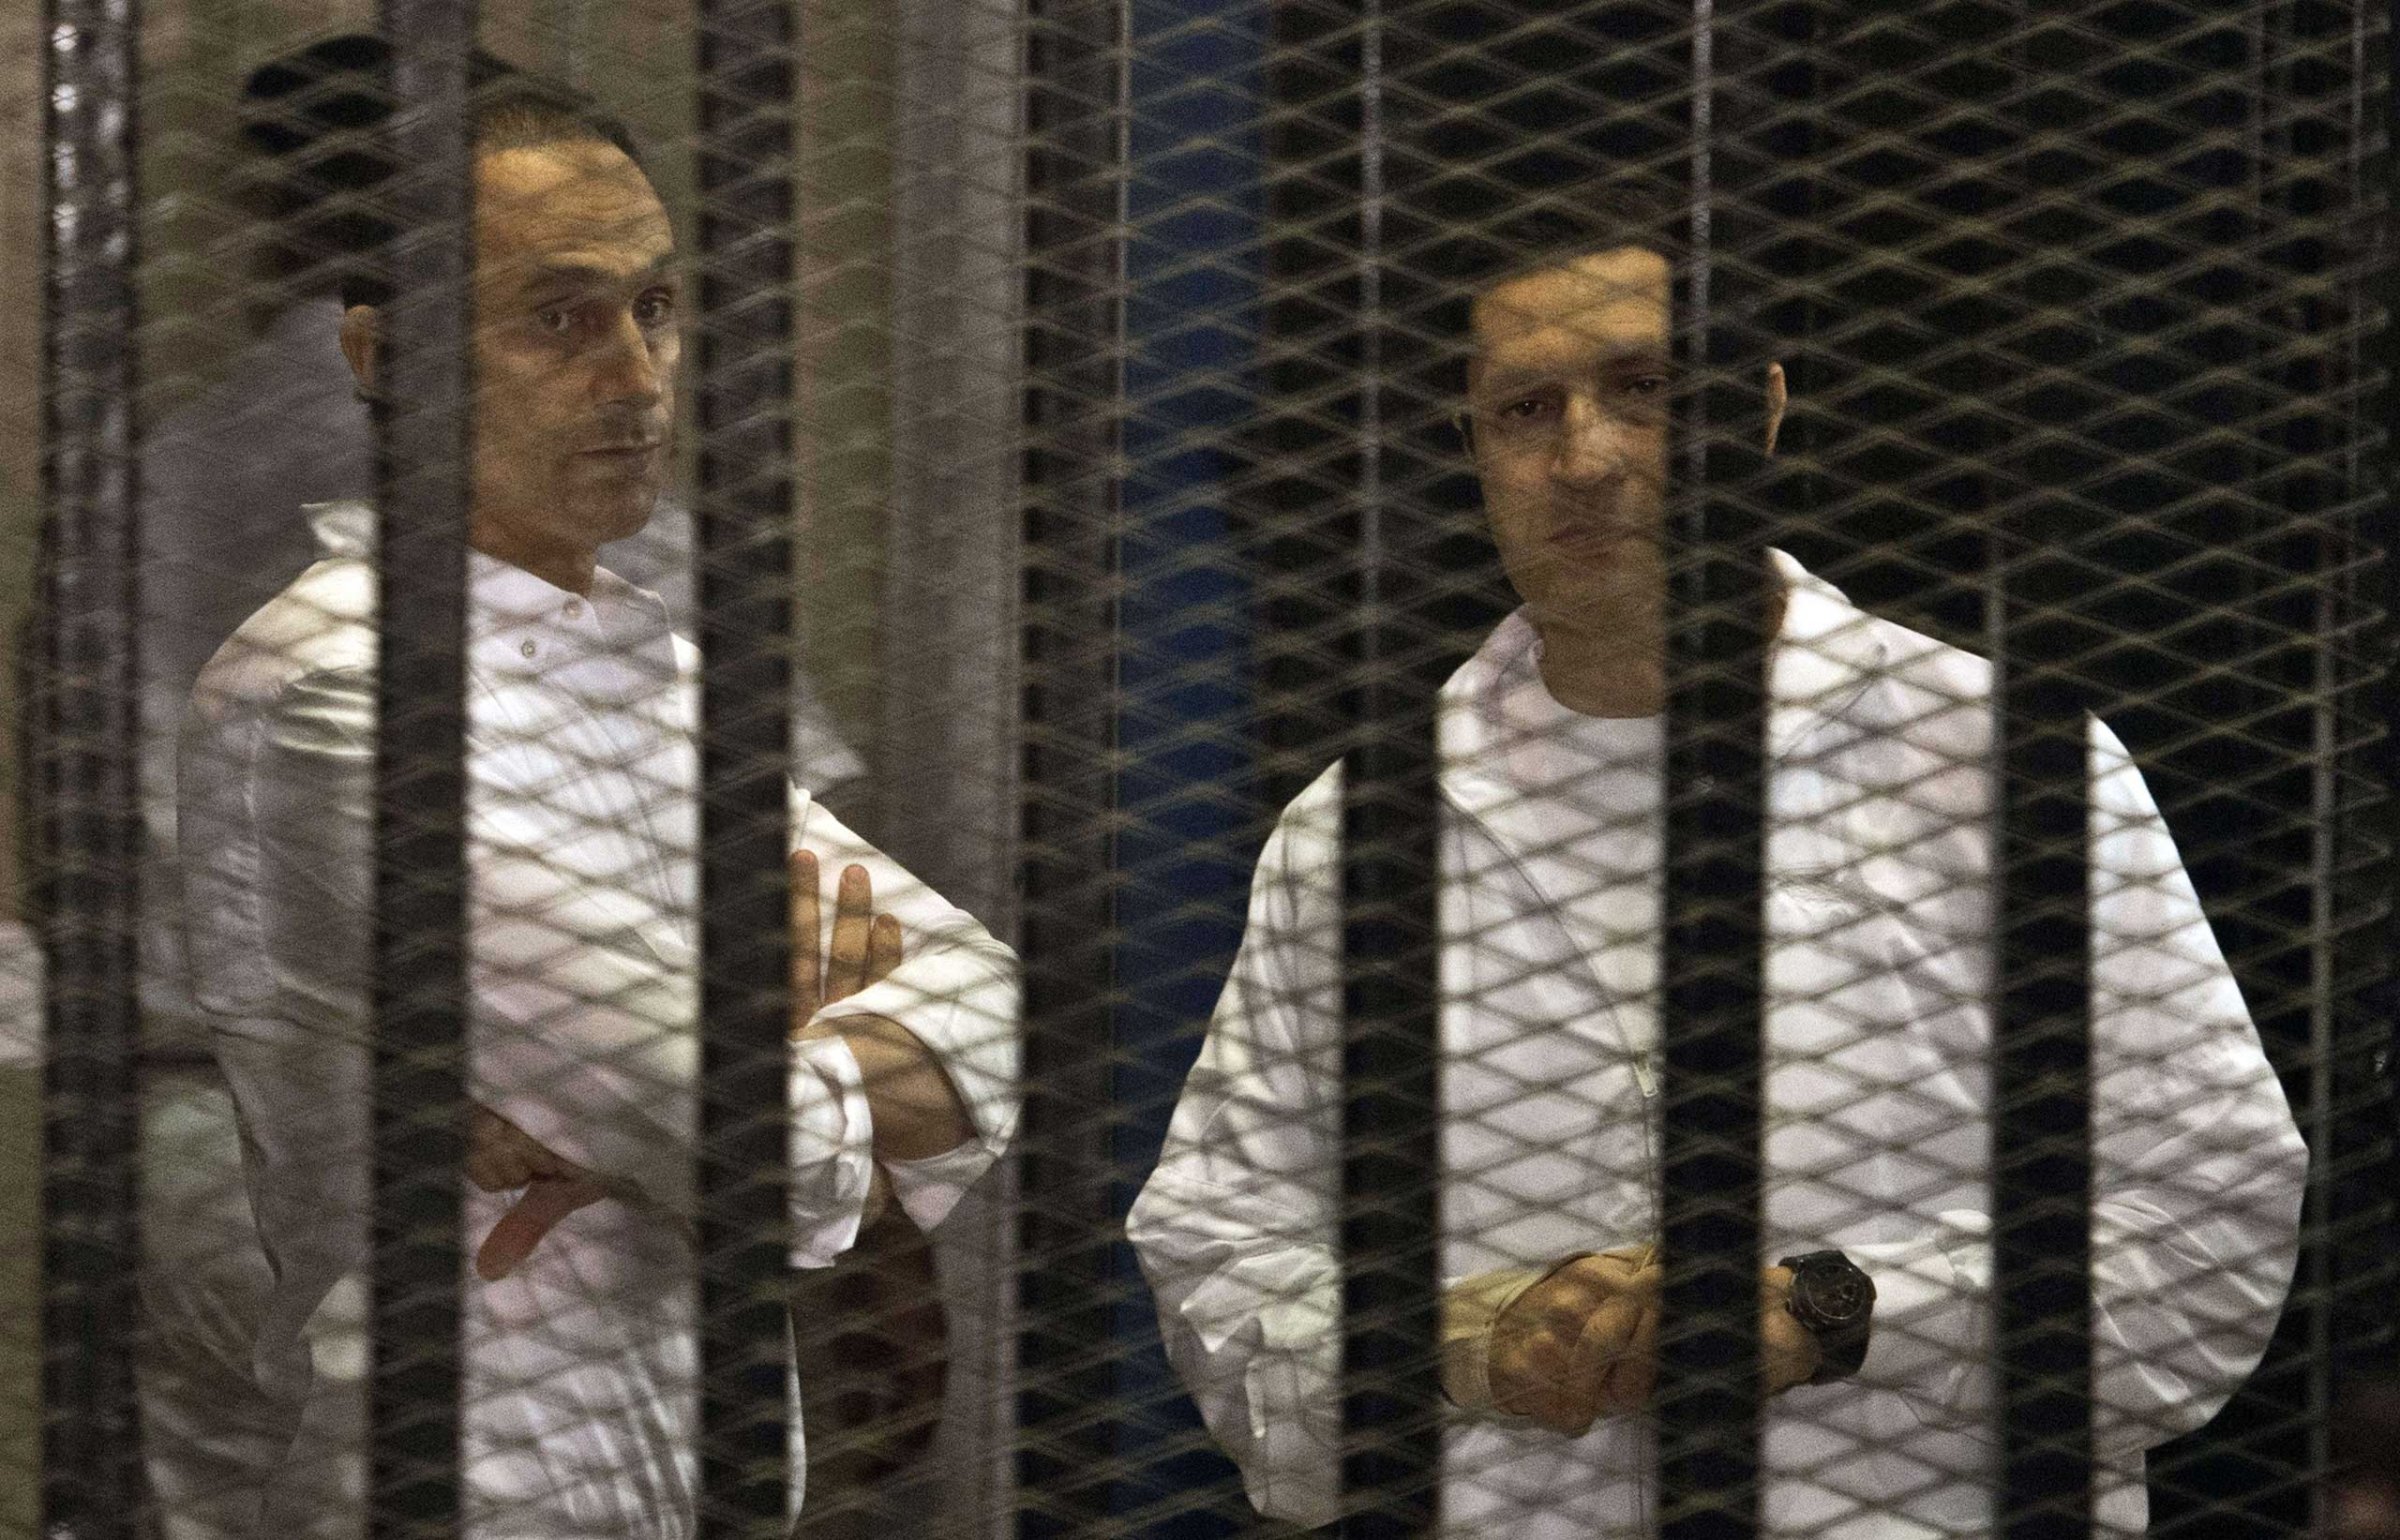 The sons of ousted Egyptian president Hosni Mubarak, Gamal and Alaa behind the defendants' cage during their retrial at the Police Academy in Cairo in 2013.